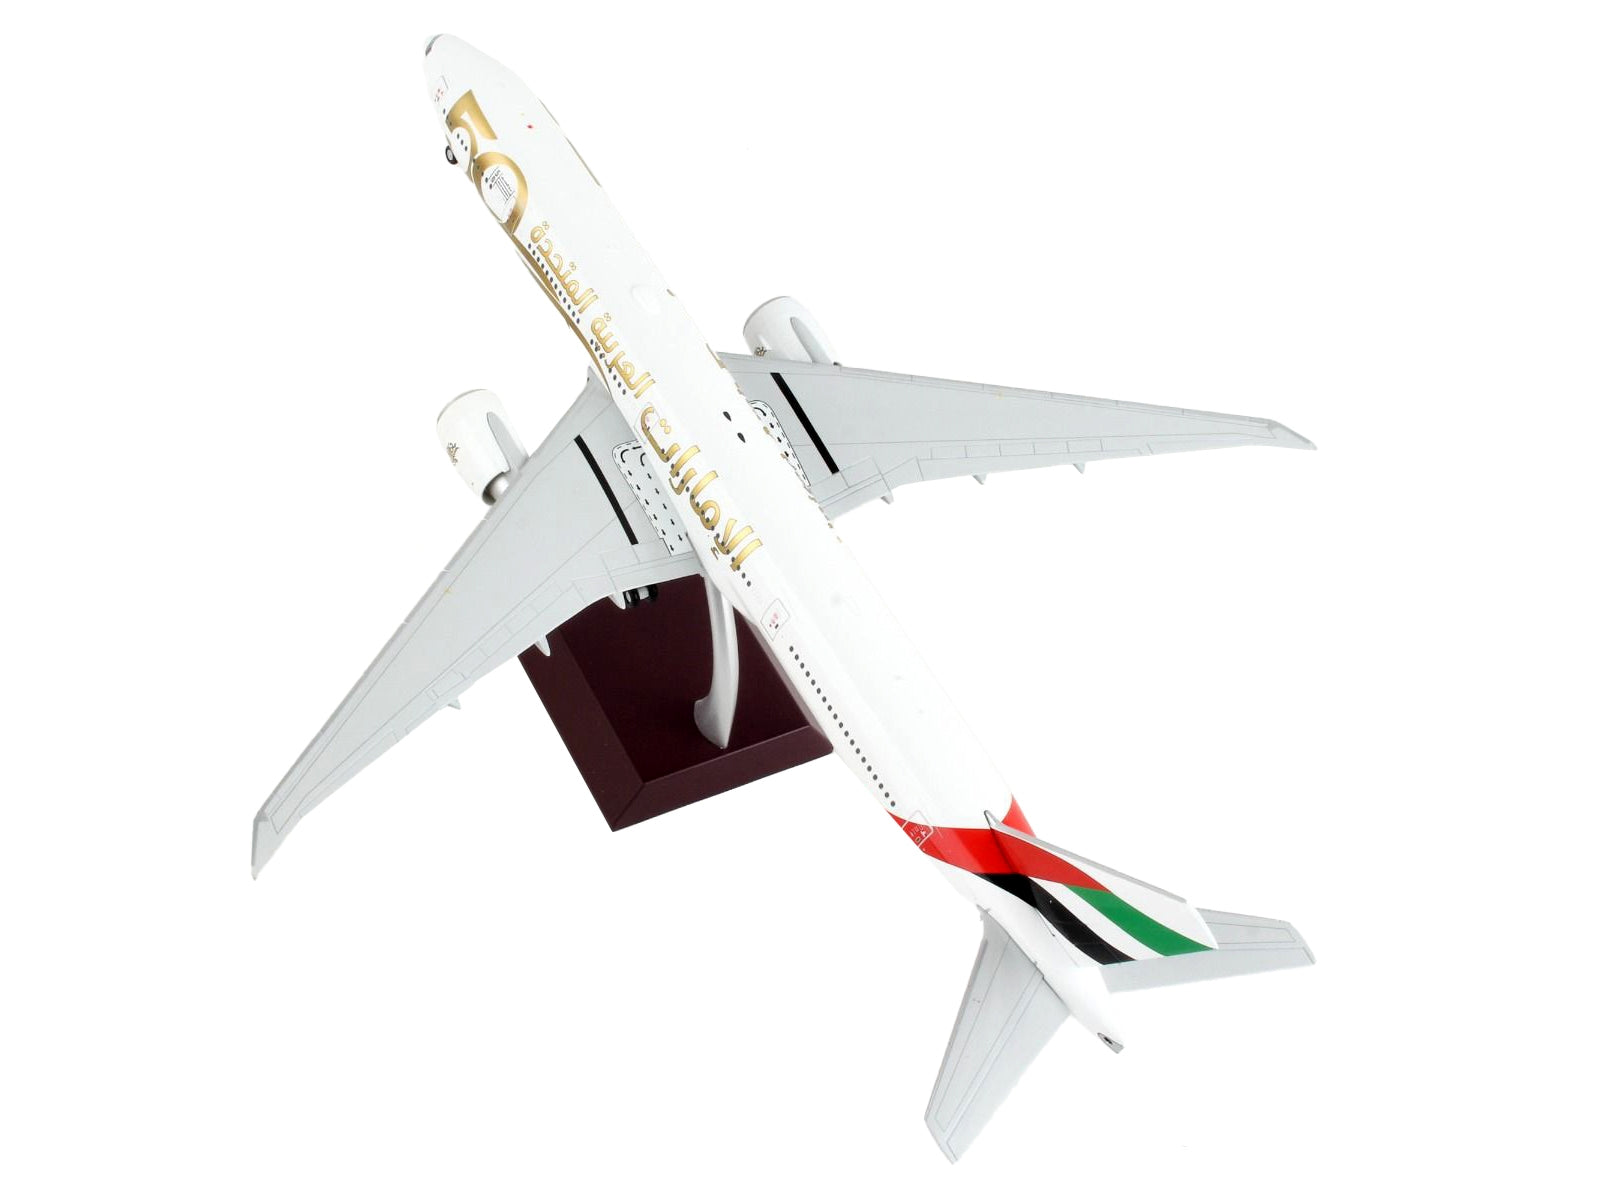 Boeing 777-300ER Commercial Aircraft "Emirates Airlines - 50th Anniversary of UAE"